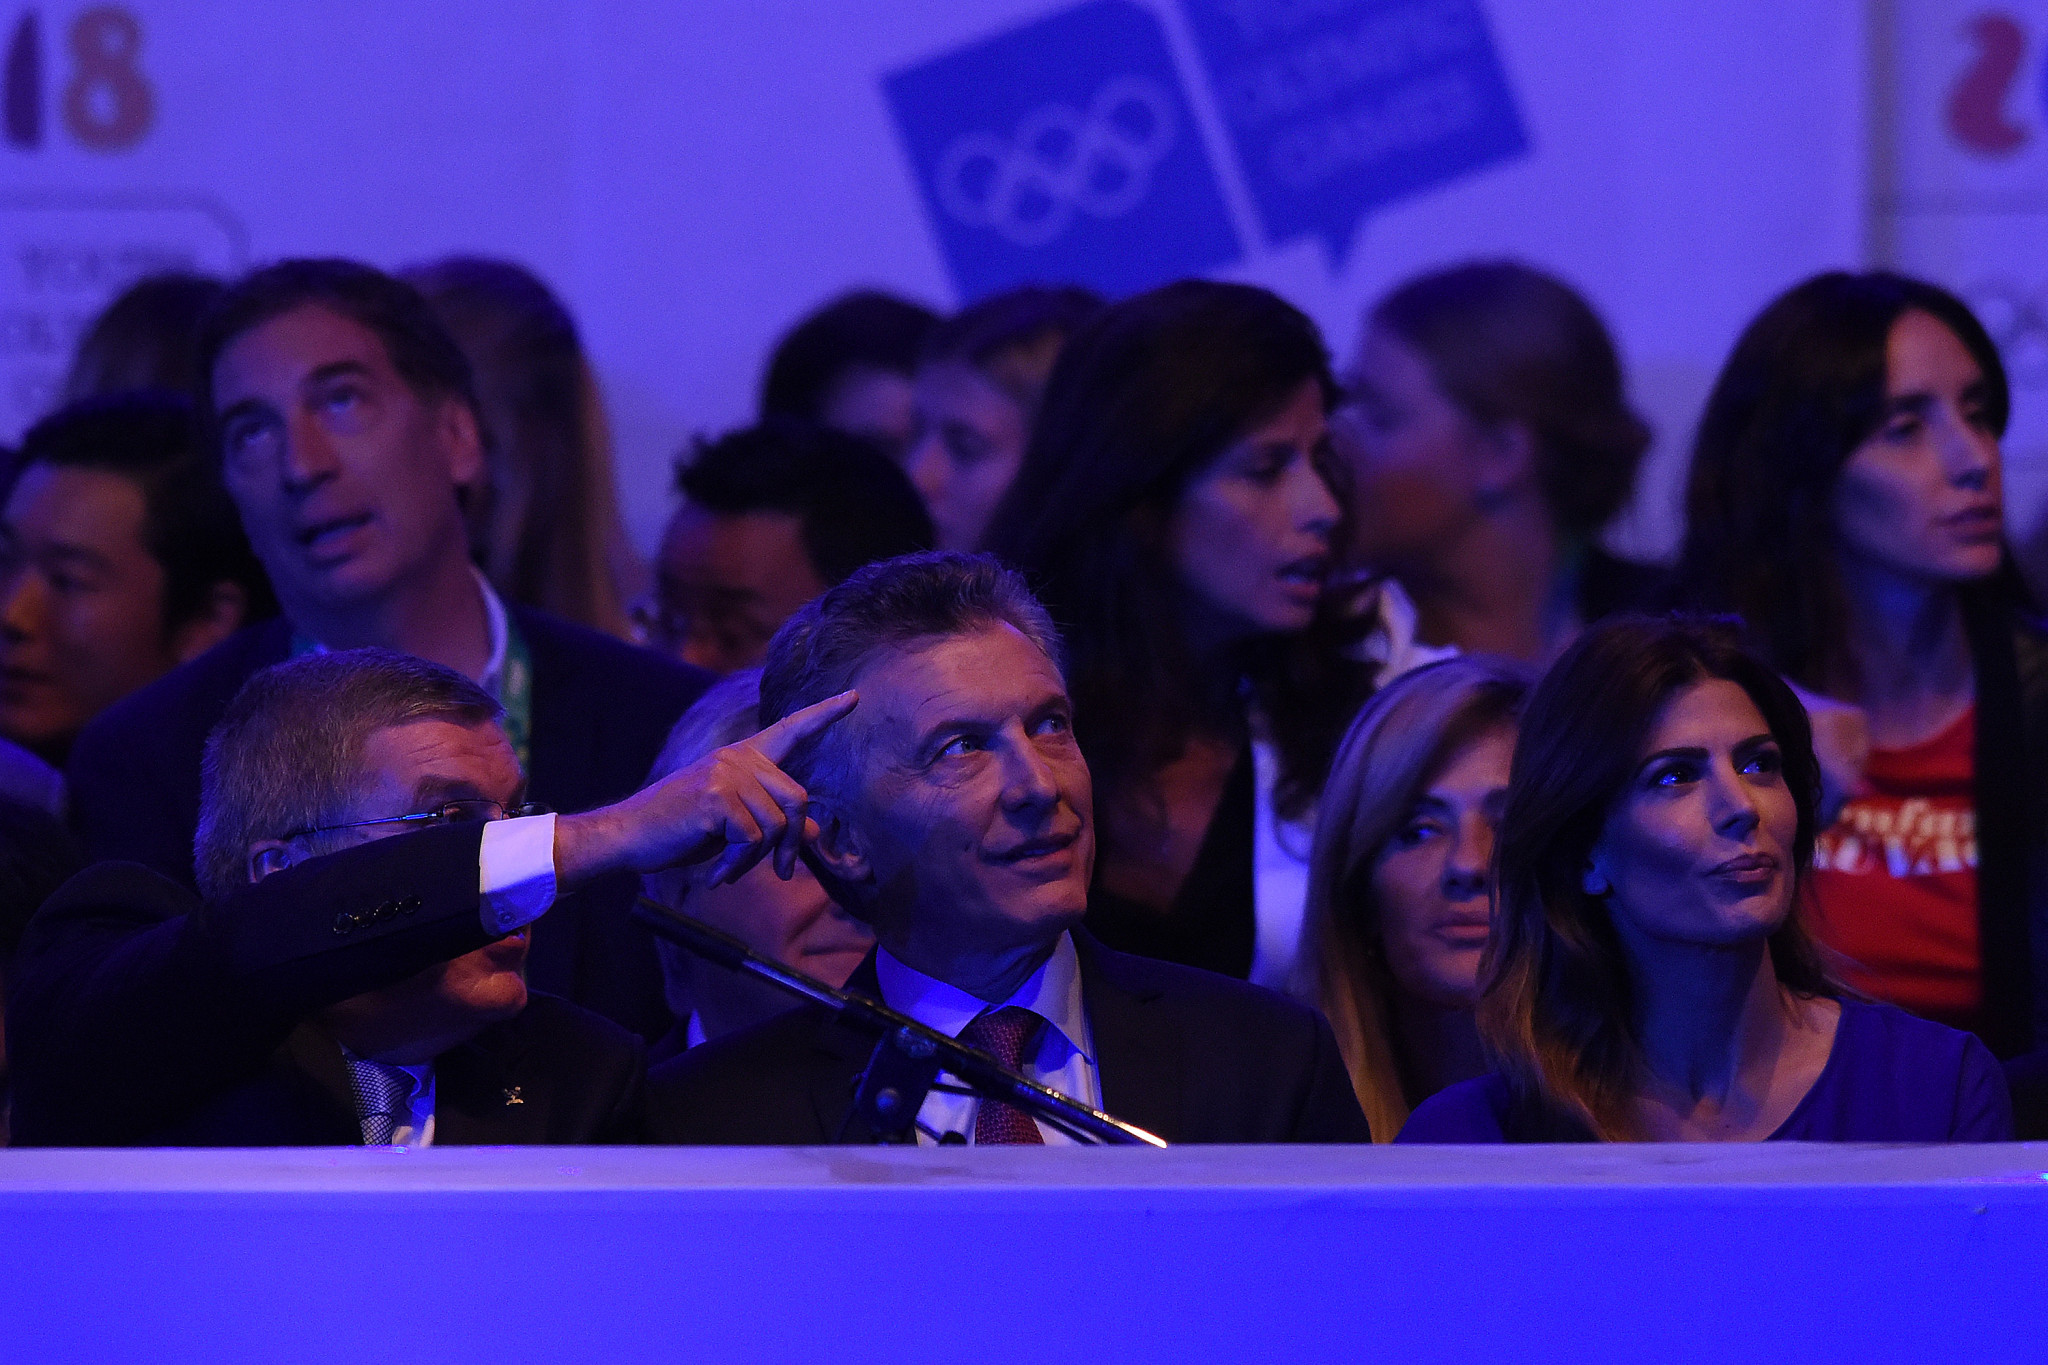 IOC President Thomas Bach was joined by Argentinian President Mauricio Macri at the Ceremony ©Getty Images